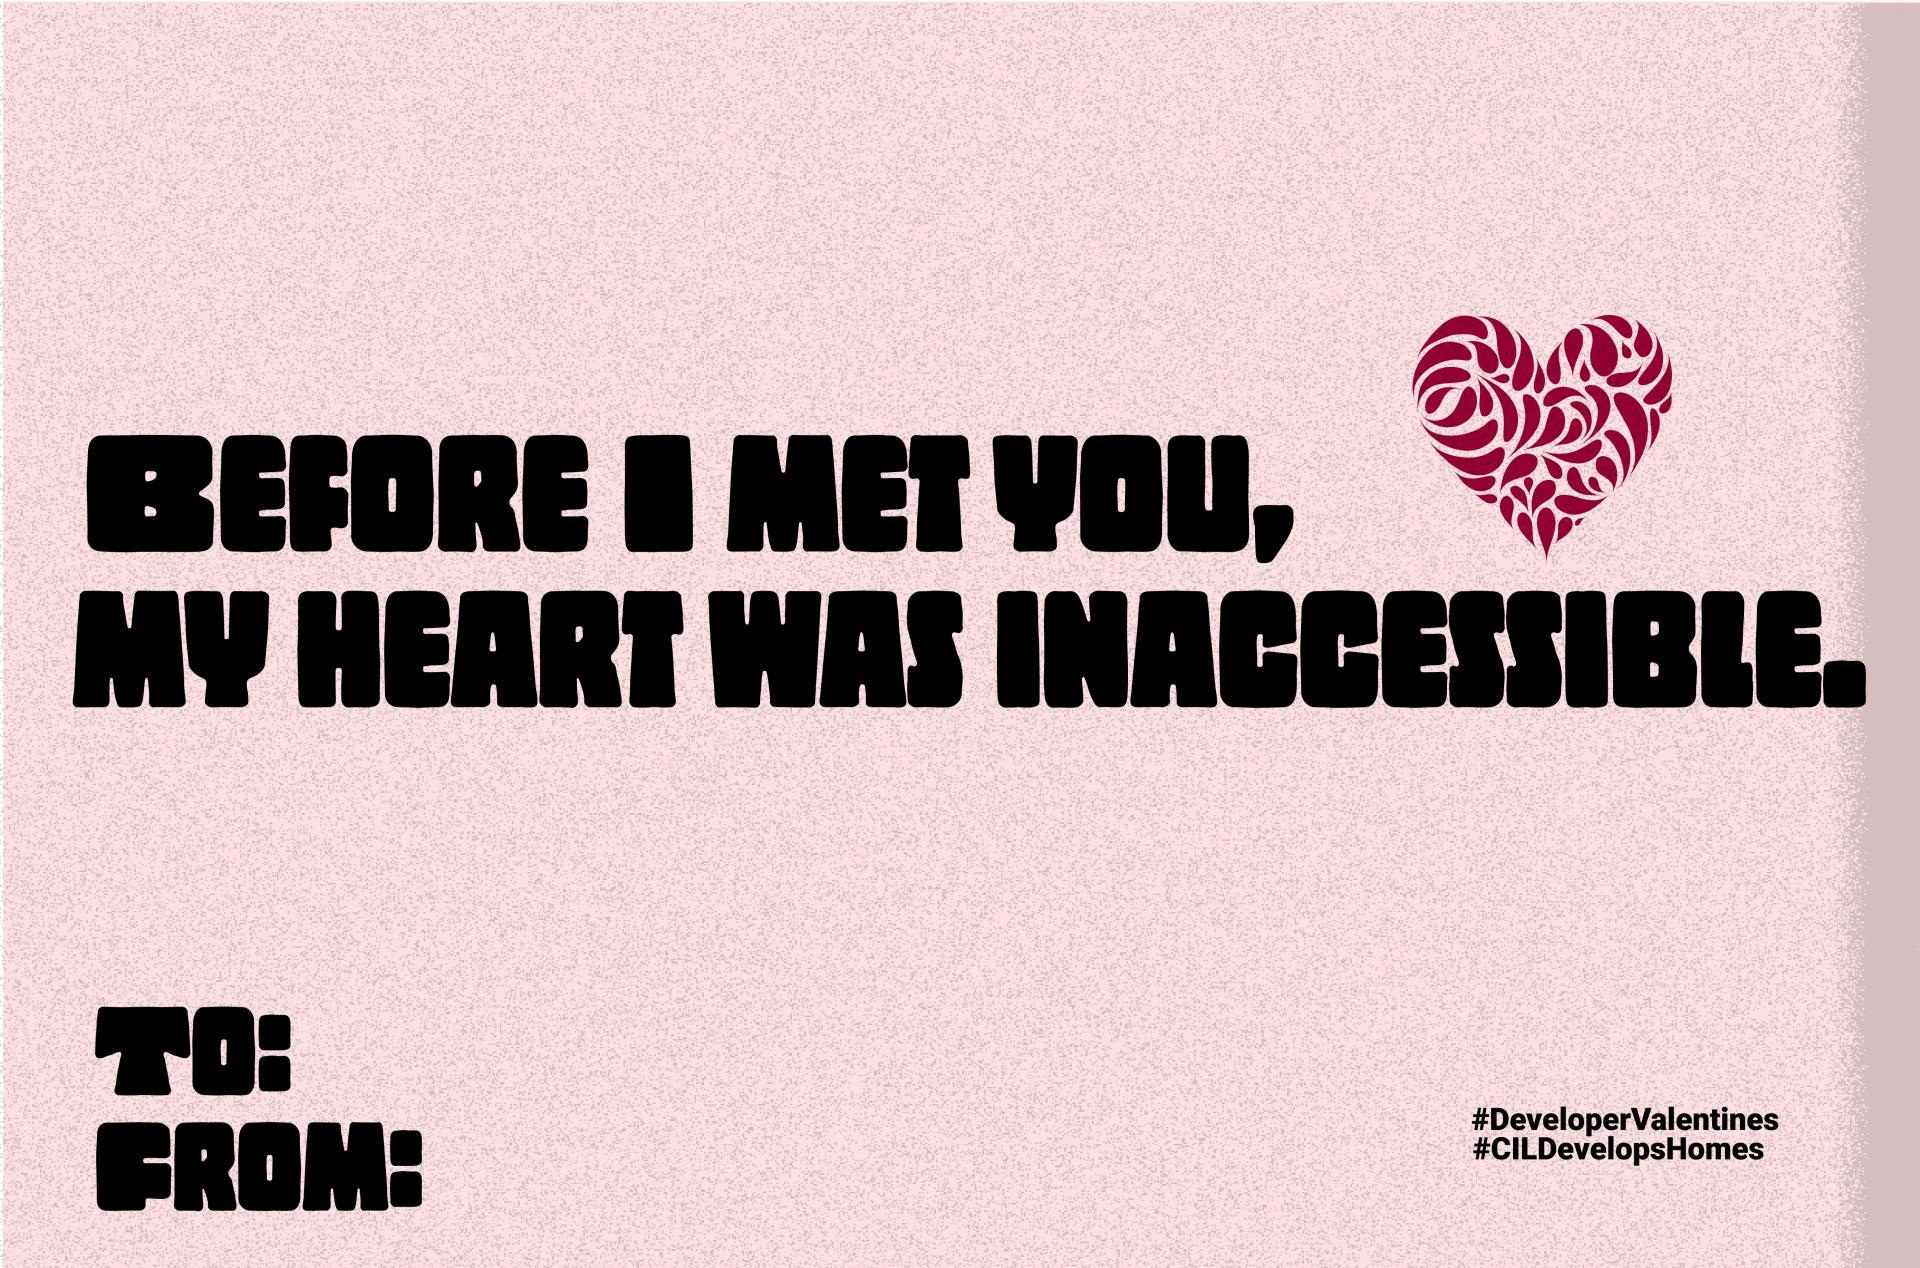 Before I Met You, My Heart Was Inaccessible. #DeveloperValentines